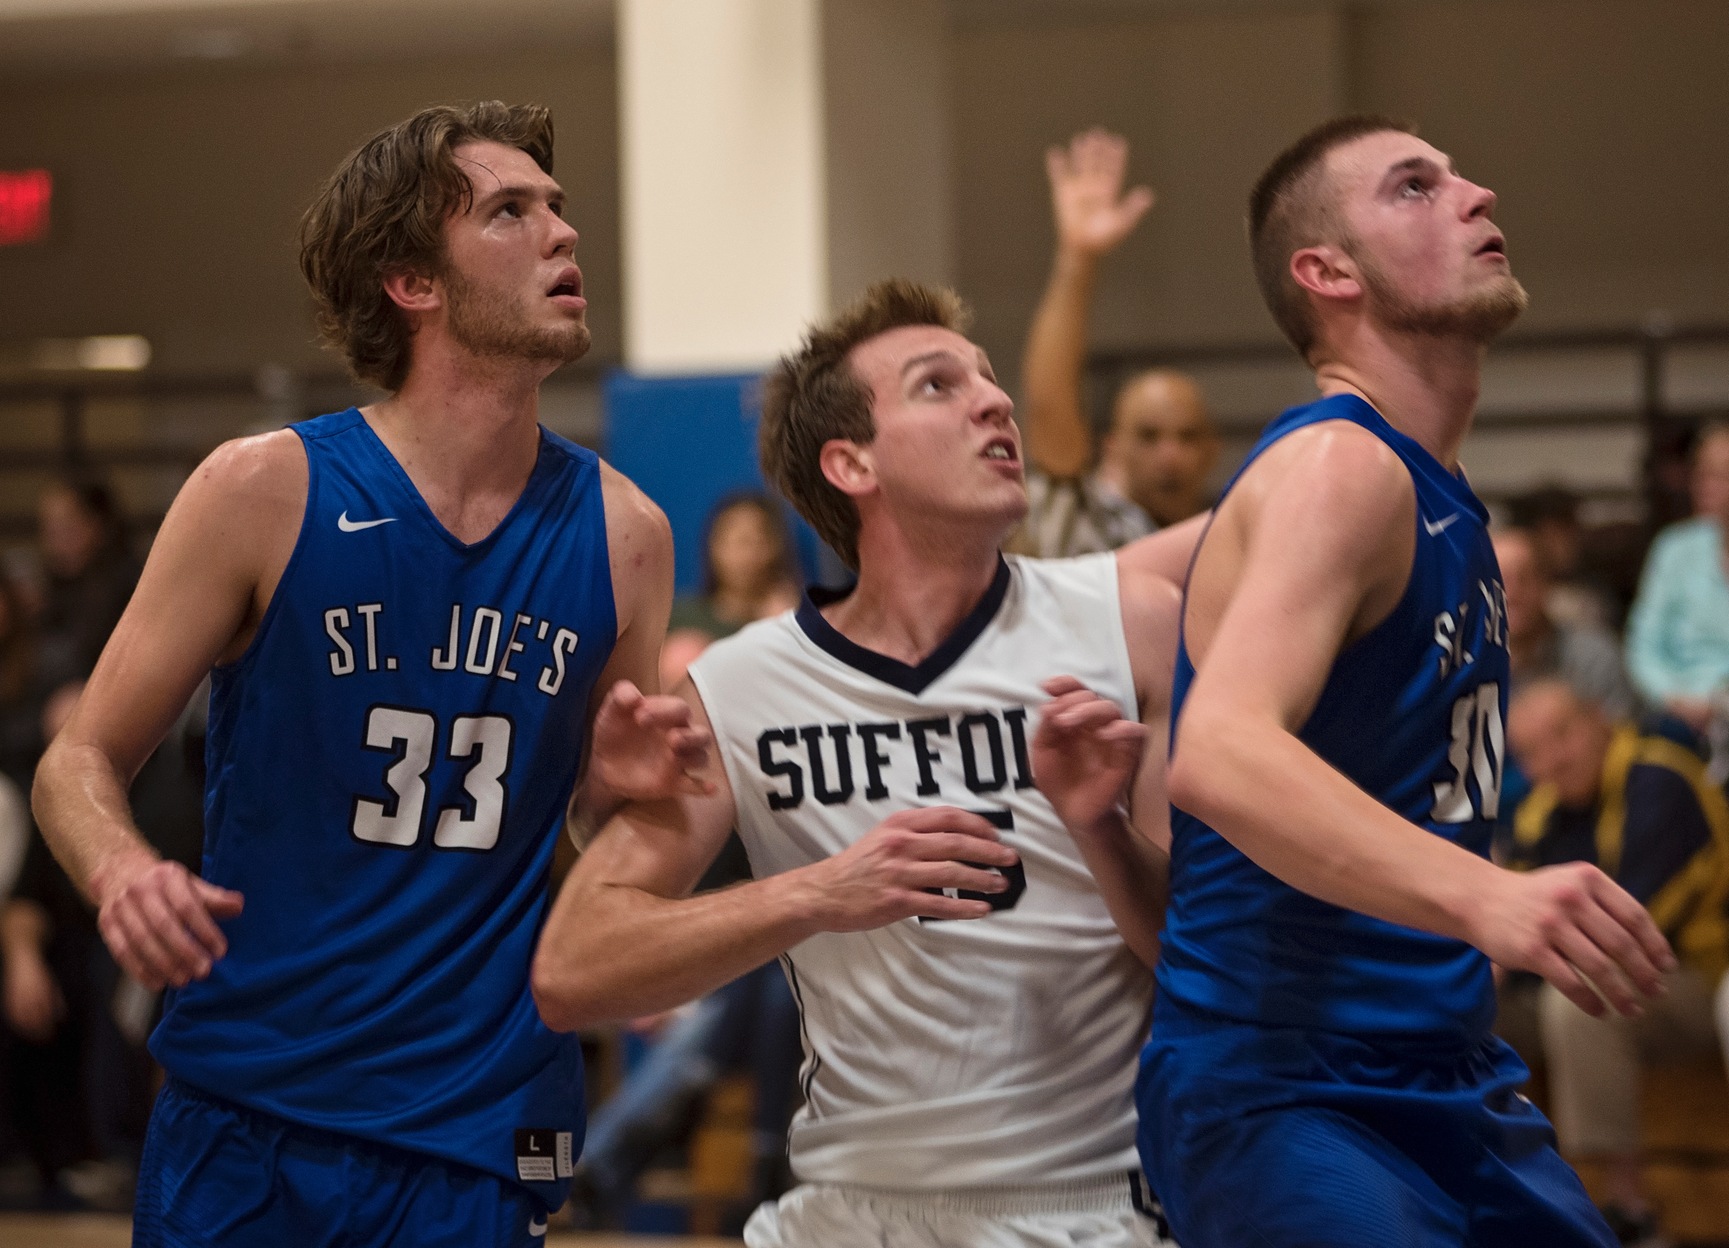 Men’s Basketball Heads to League Leader Lasell Saturday